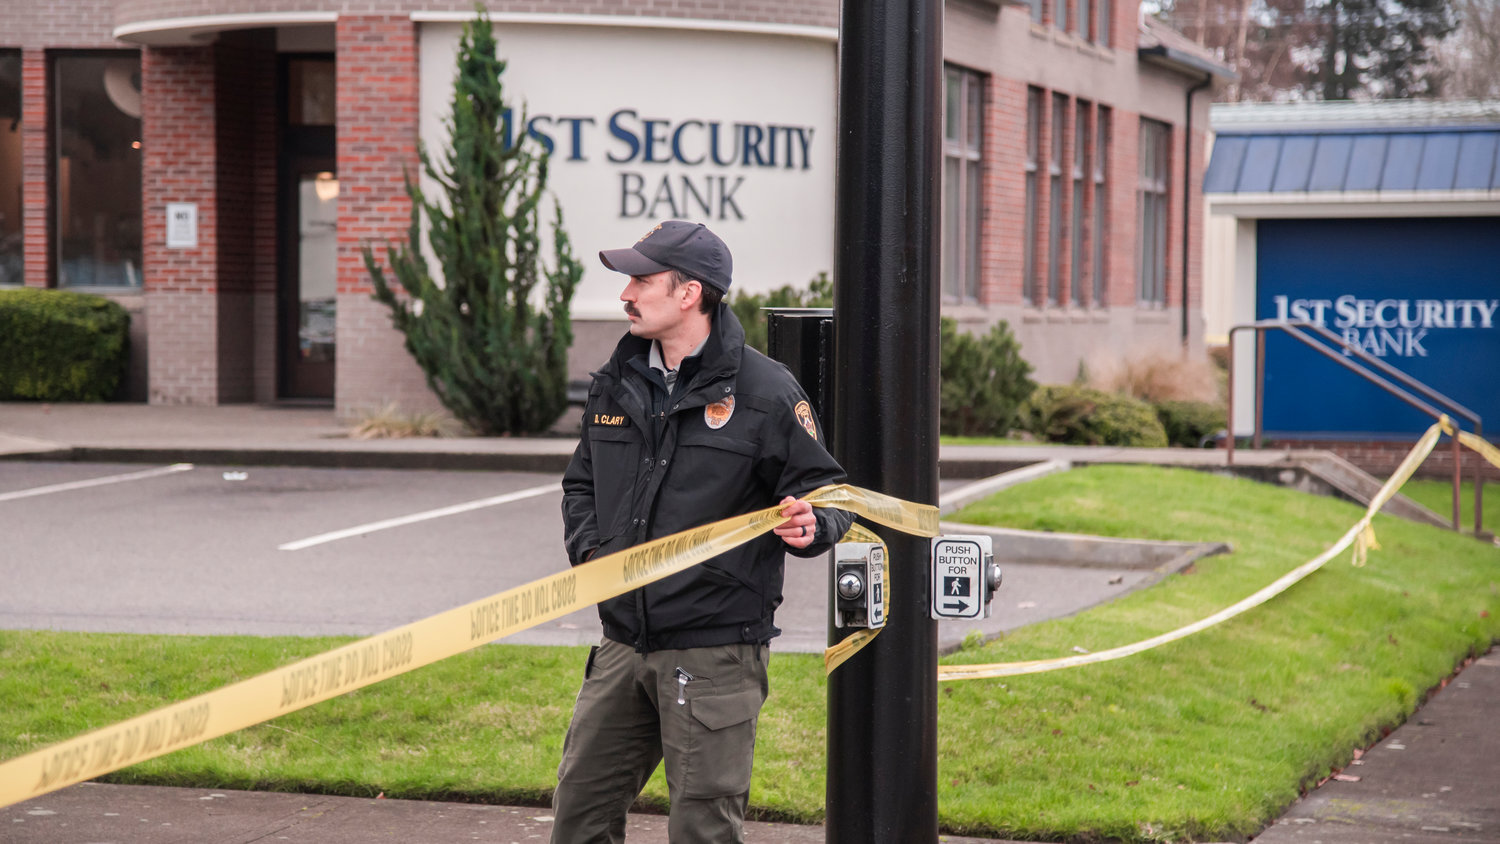 Detective Sgt. Dave Clary holds police line tape wrapped around 1st Security Bank in Centralia Sunday morning.